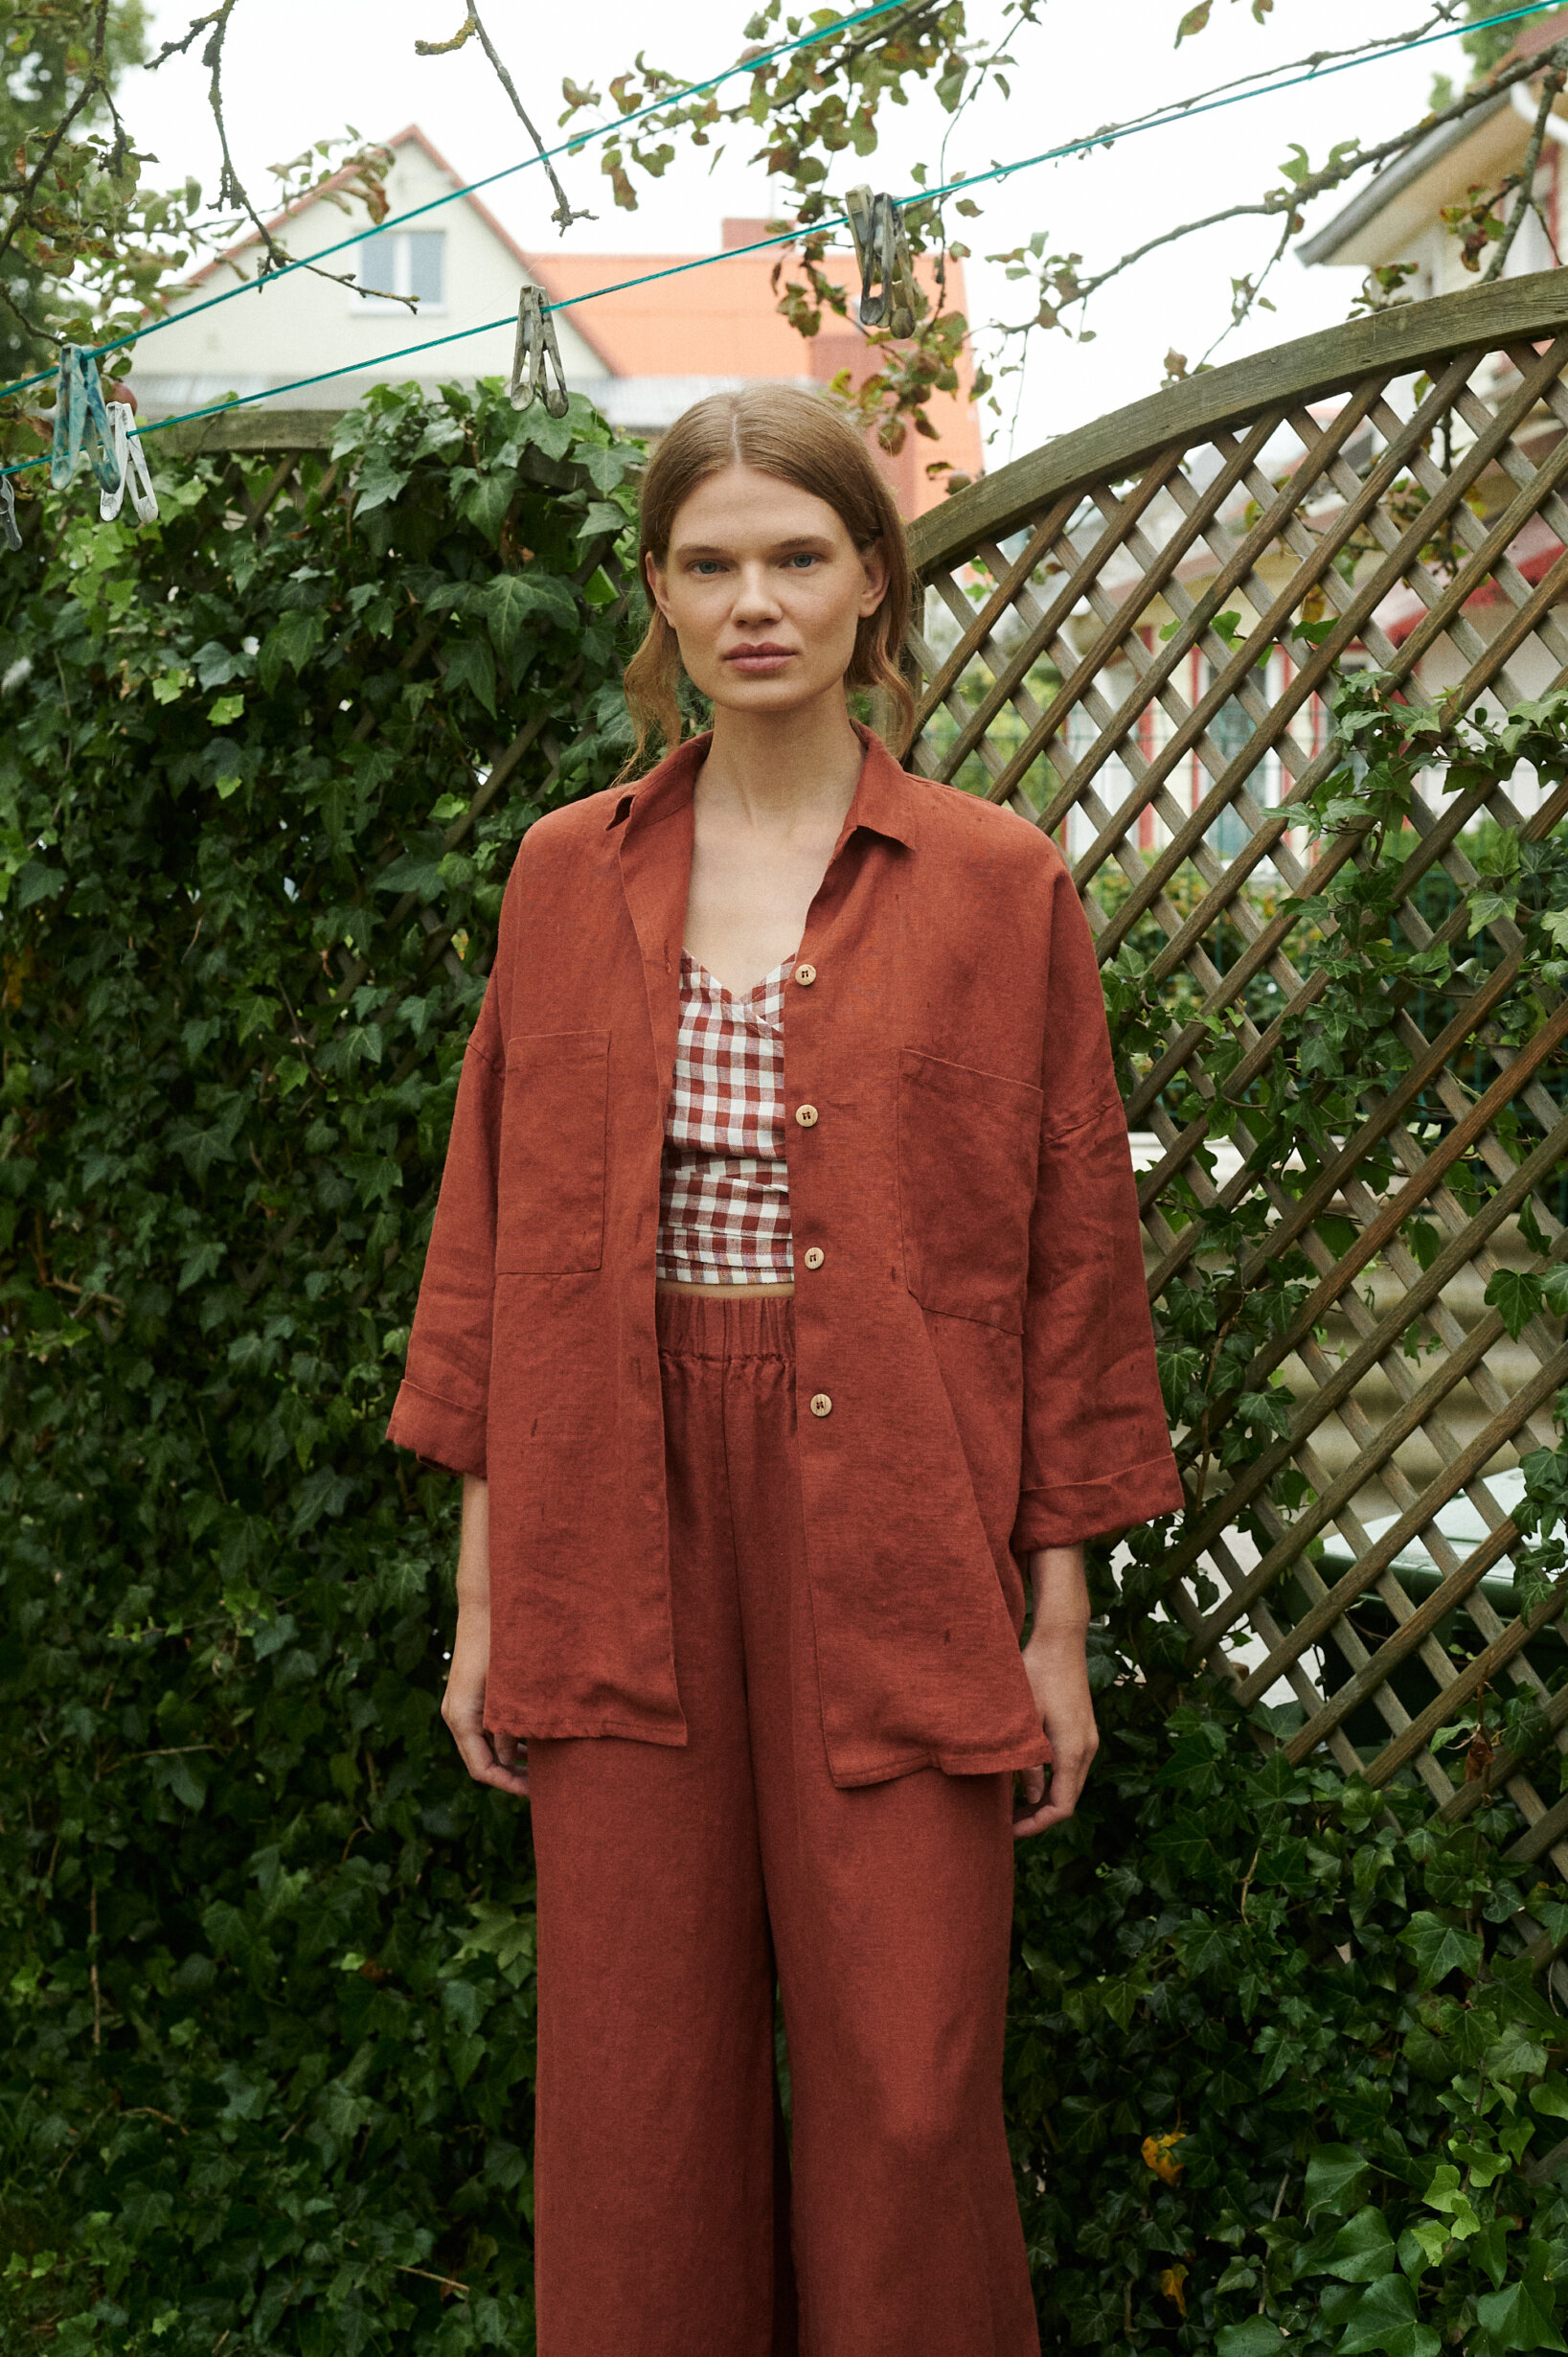 model in a garden wearing a terrracotta gingham linen wrap top and wide leg trousers and jacket in terracotta linen